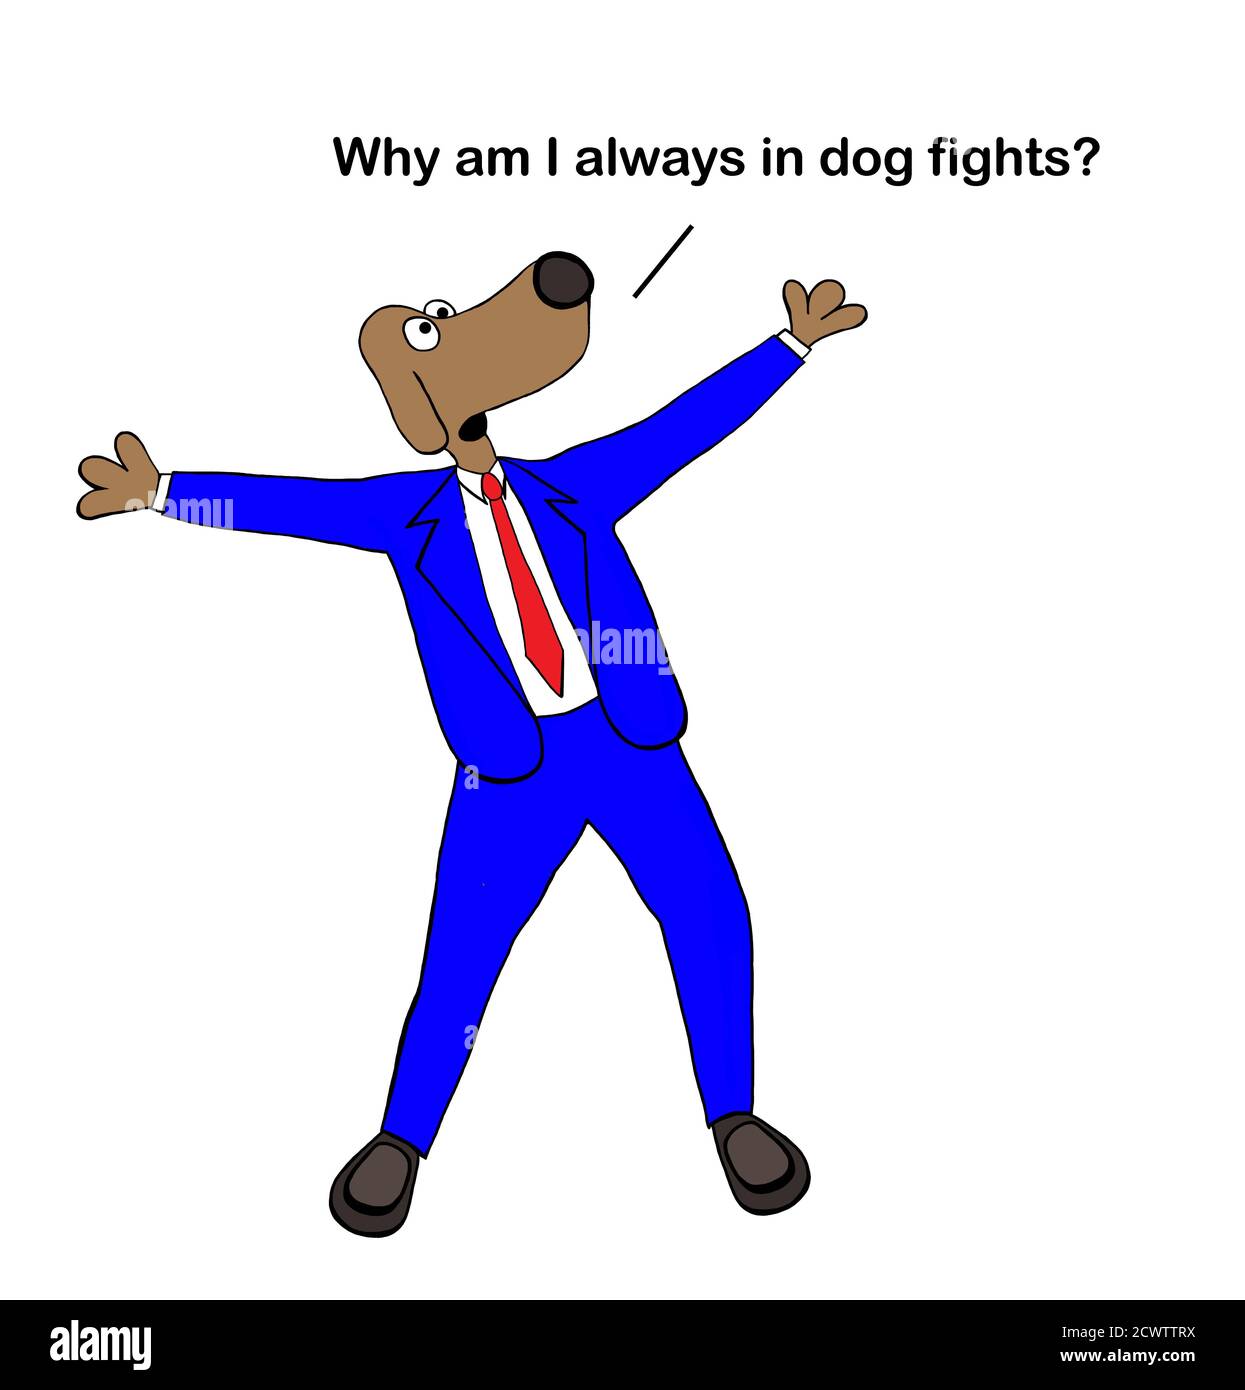 Color cartoon of a dog wearing a suit and shouting out why am I always in dog fights? Stock Photo